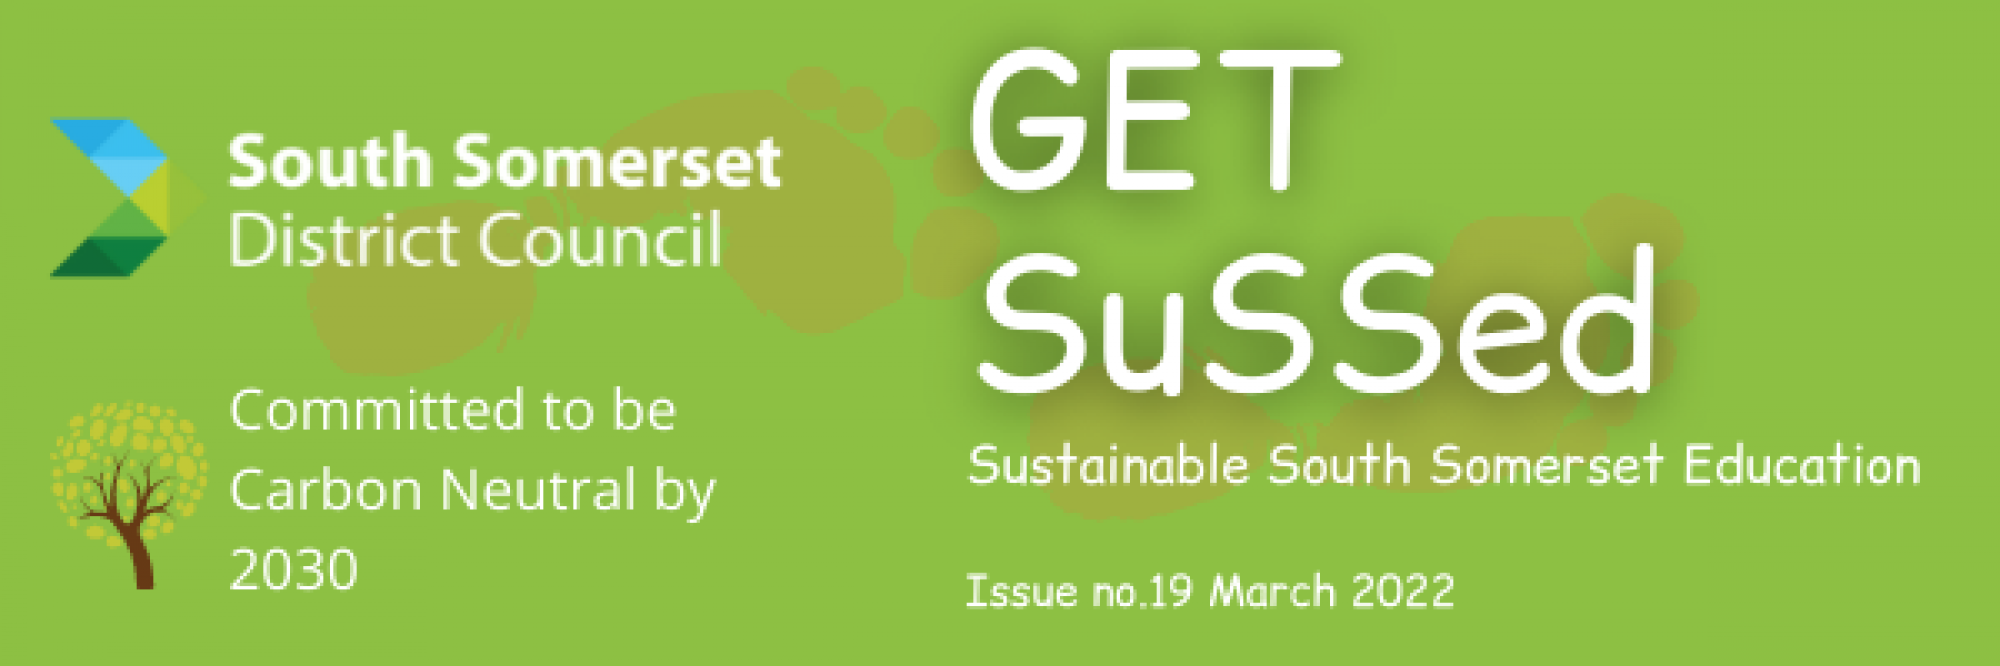 💚 March into Spring with Get Sussed - Environmental News and Opportunities from South Somerset District Council 💚